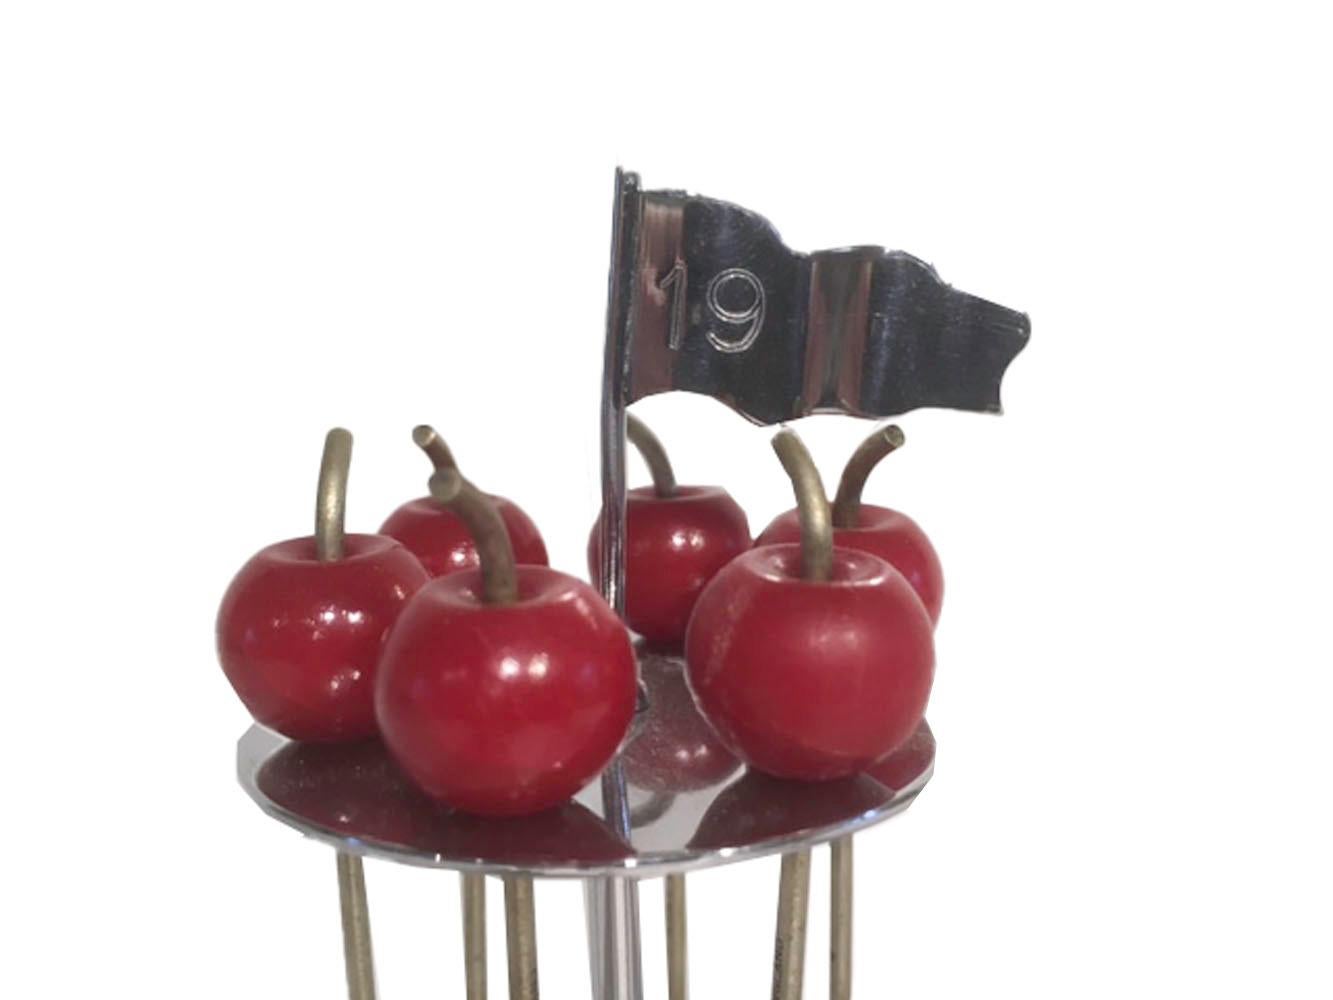 Vintage golf themed chrome cocktail picks. The chrome picks with red Bakelite apple-form tops hang through a pierced disk raised on a 19th hole golf flag.